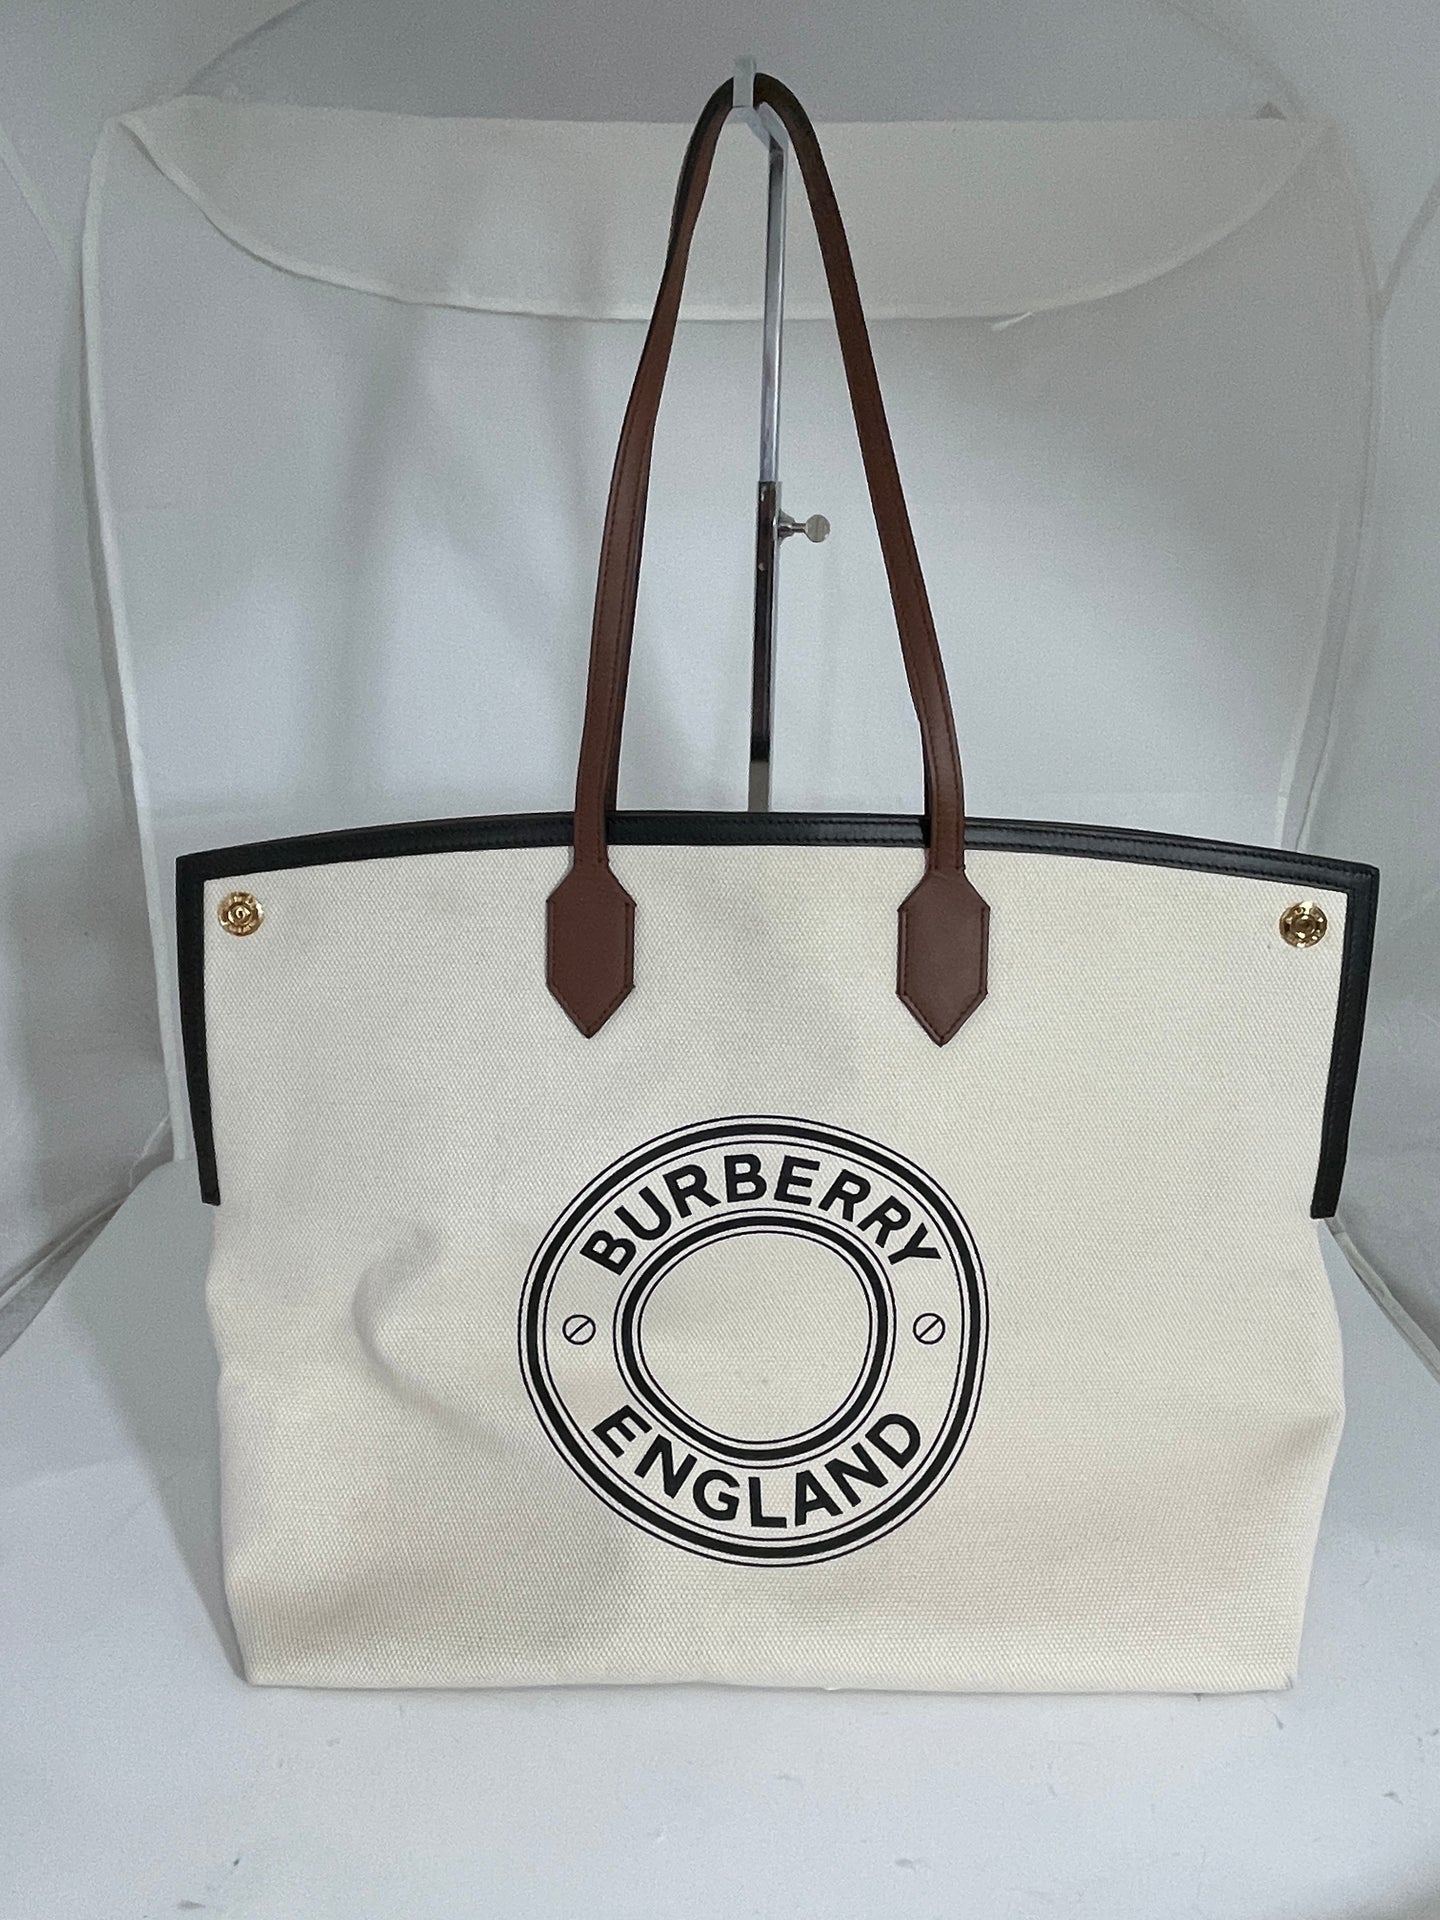 Burberry Large Top Handle Tote Bag